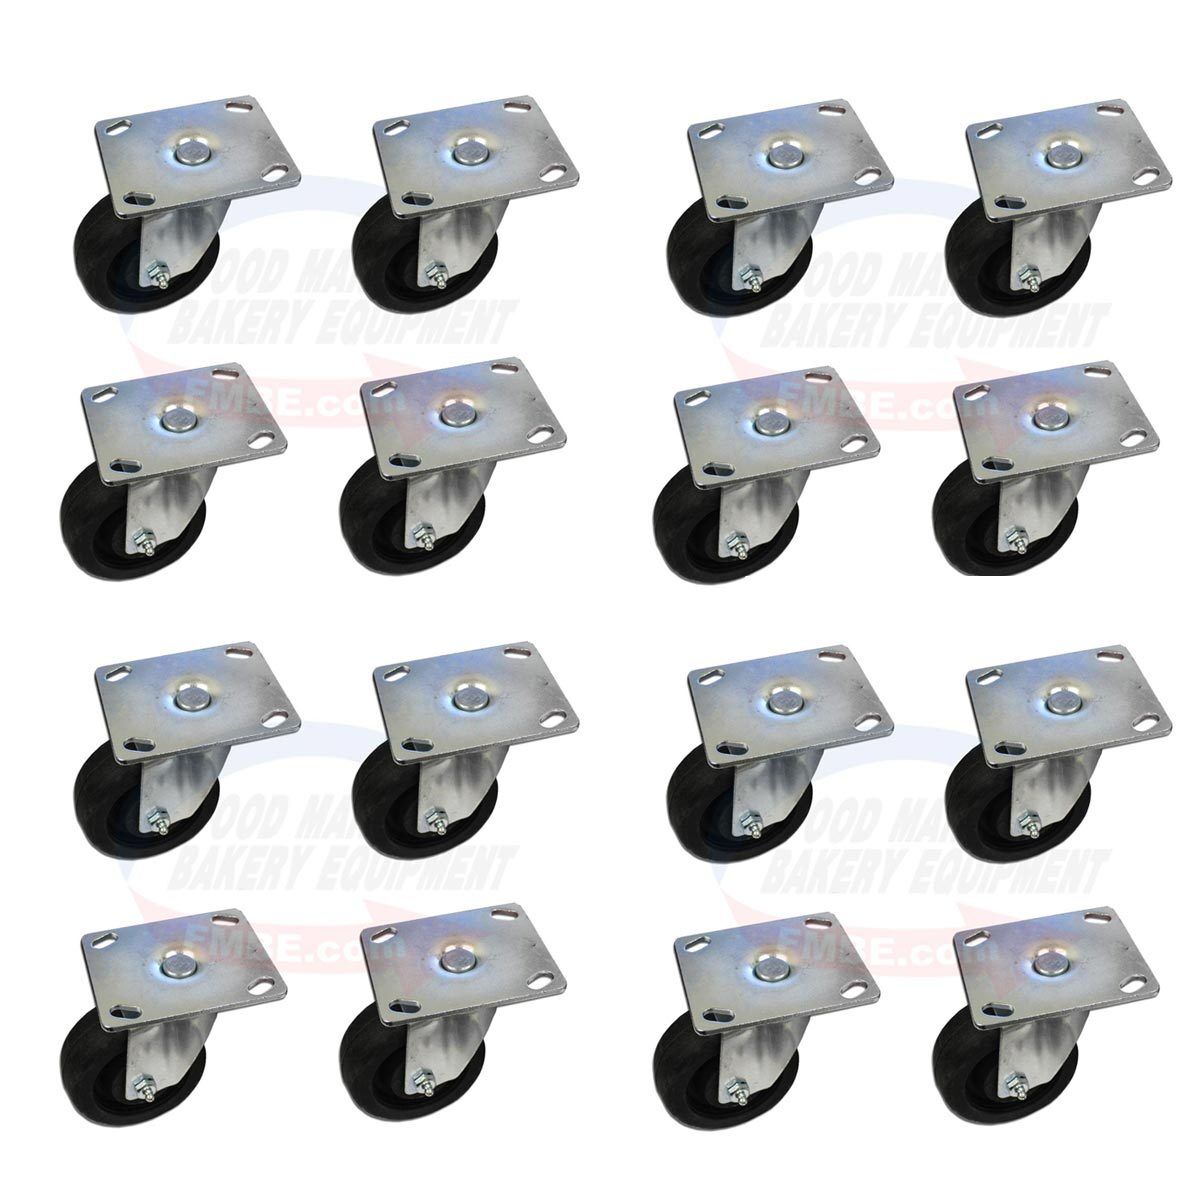 Outlet SALE SET OF 16 High Temperature Oven Casters. Wide. 2